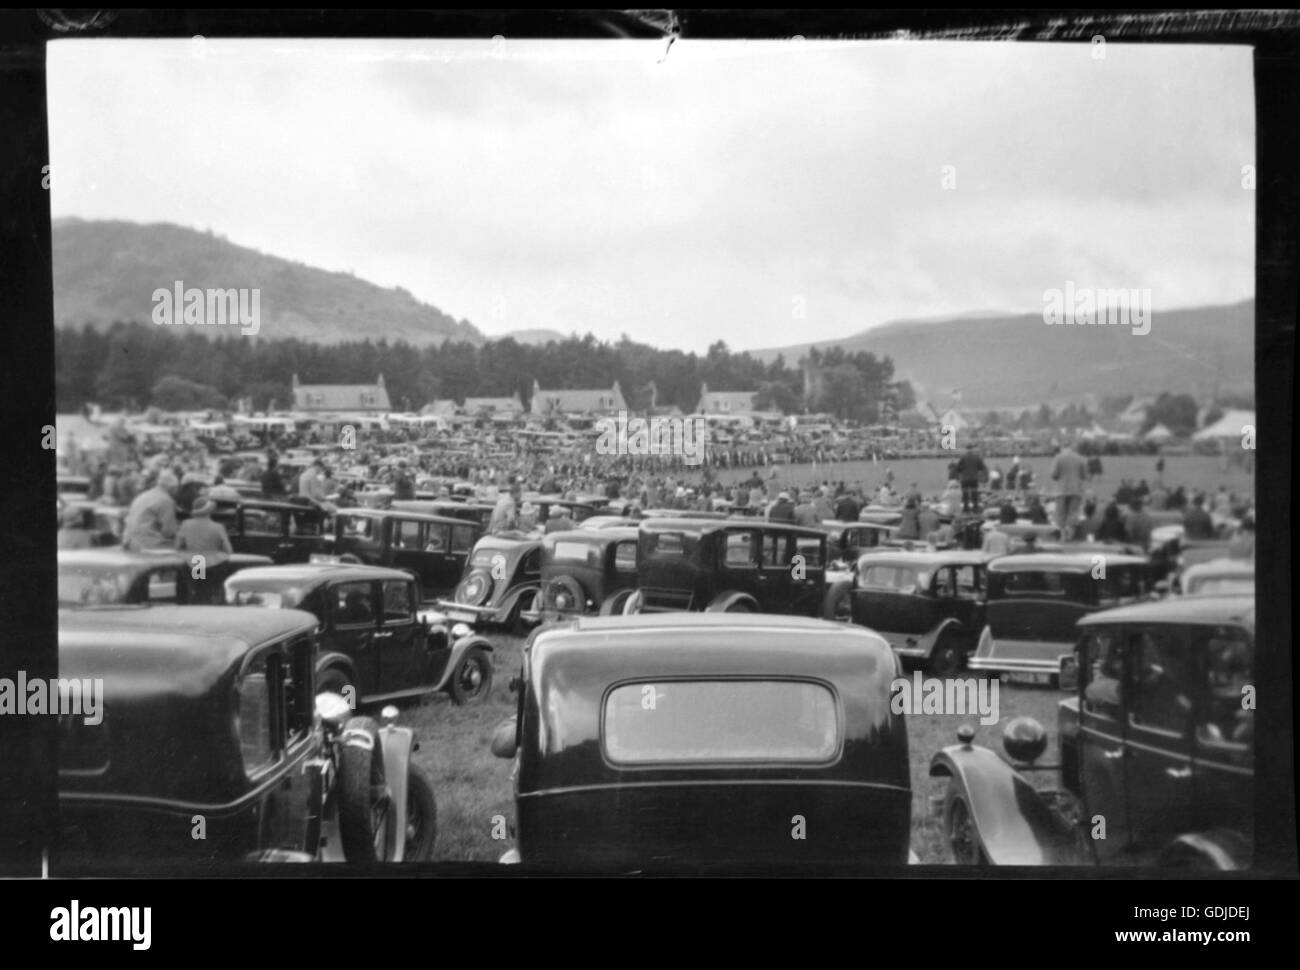 Cars parked at a Highland Games in Scotland, location unknown. c 1935. Photograph by Tony Henshaw Stock Photo